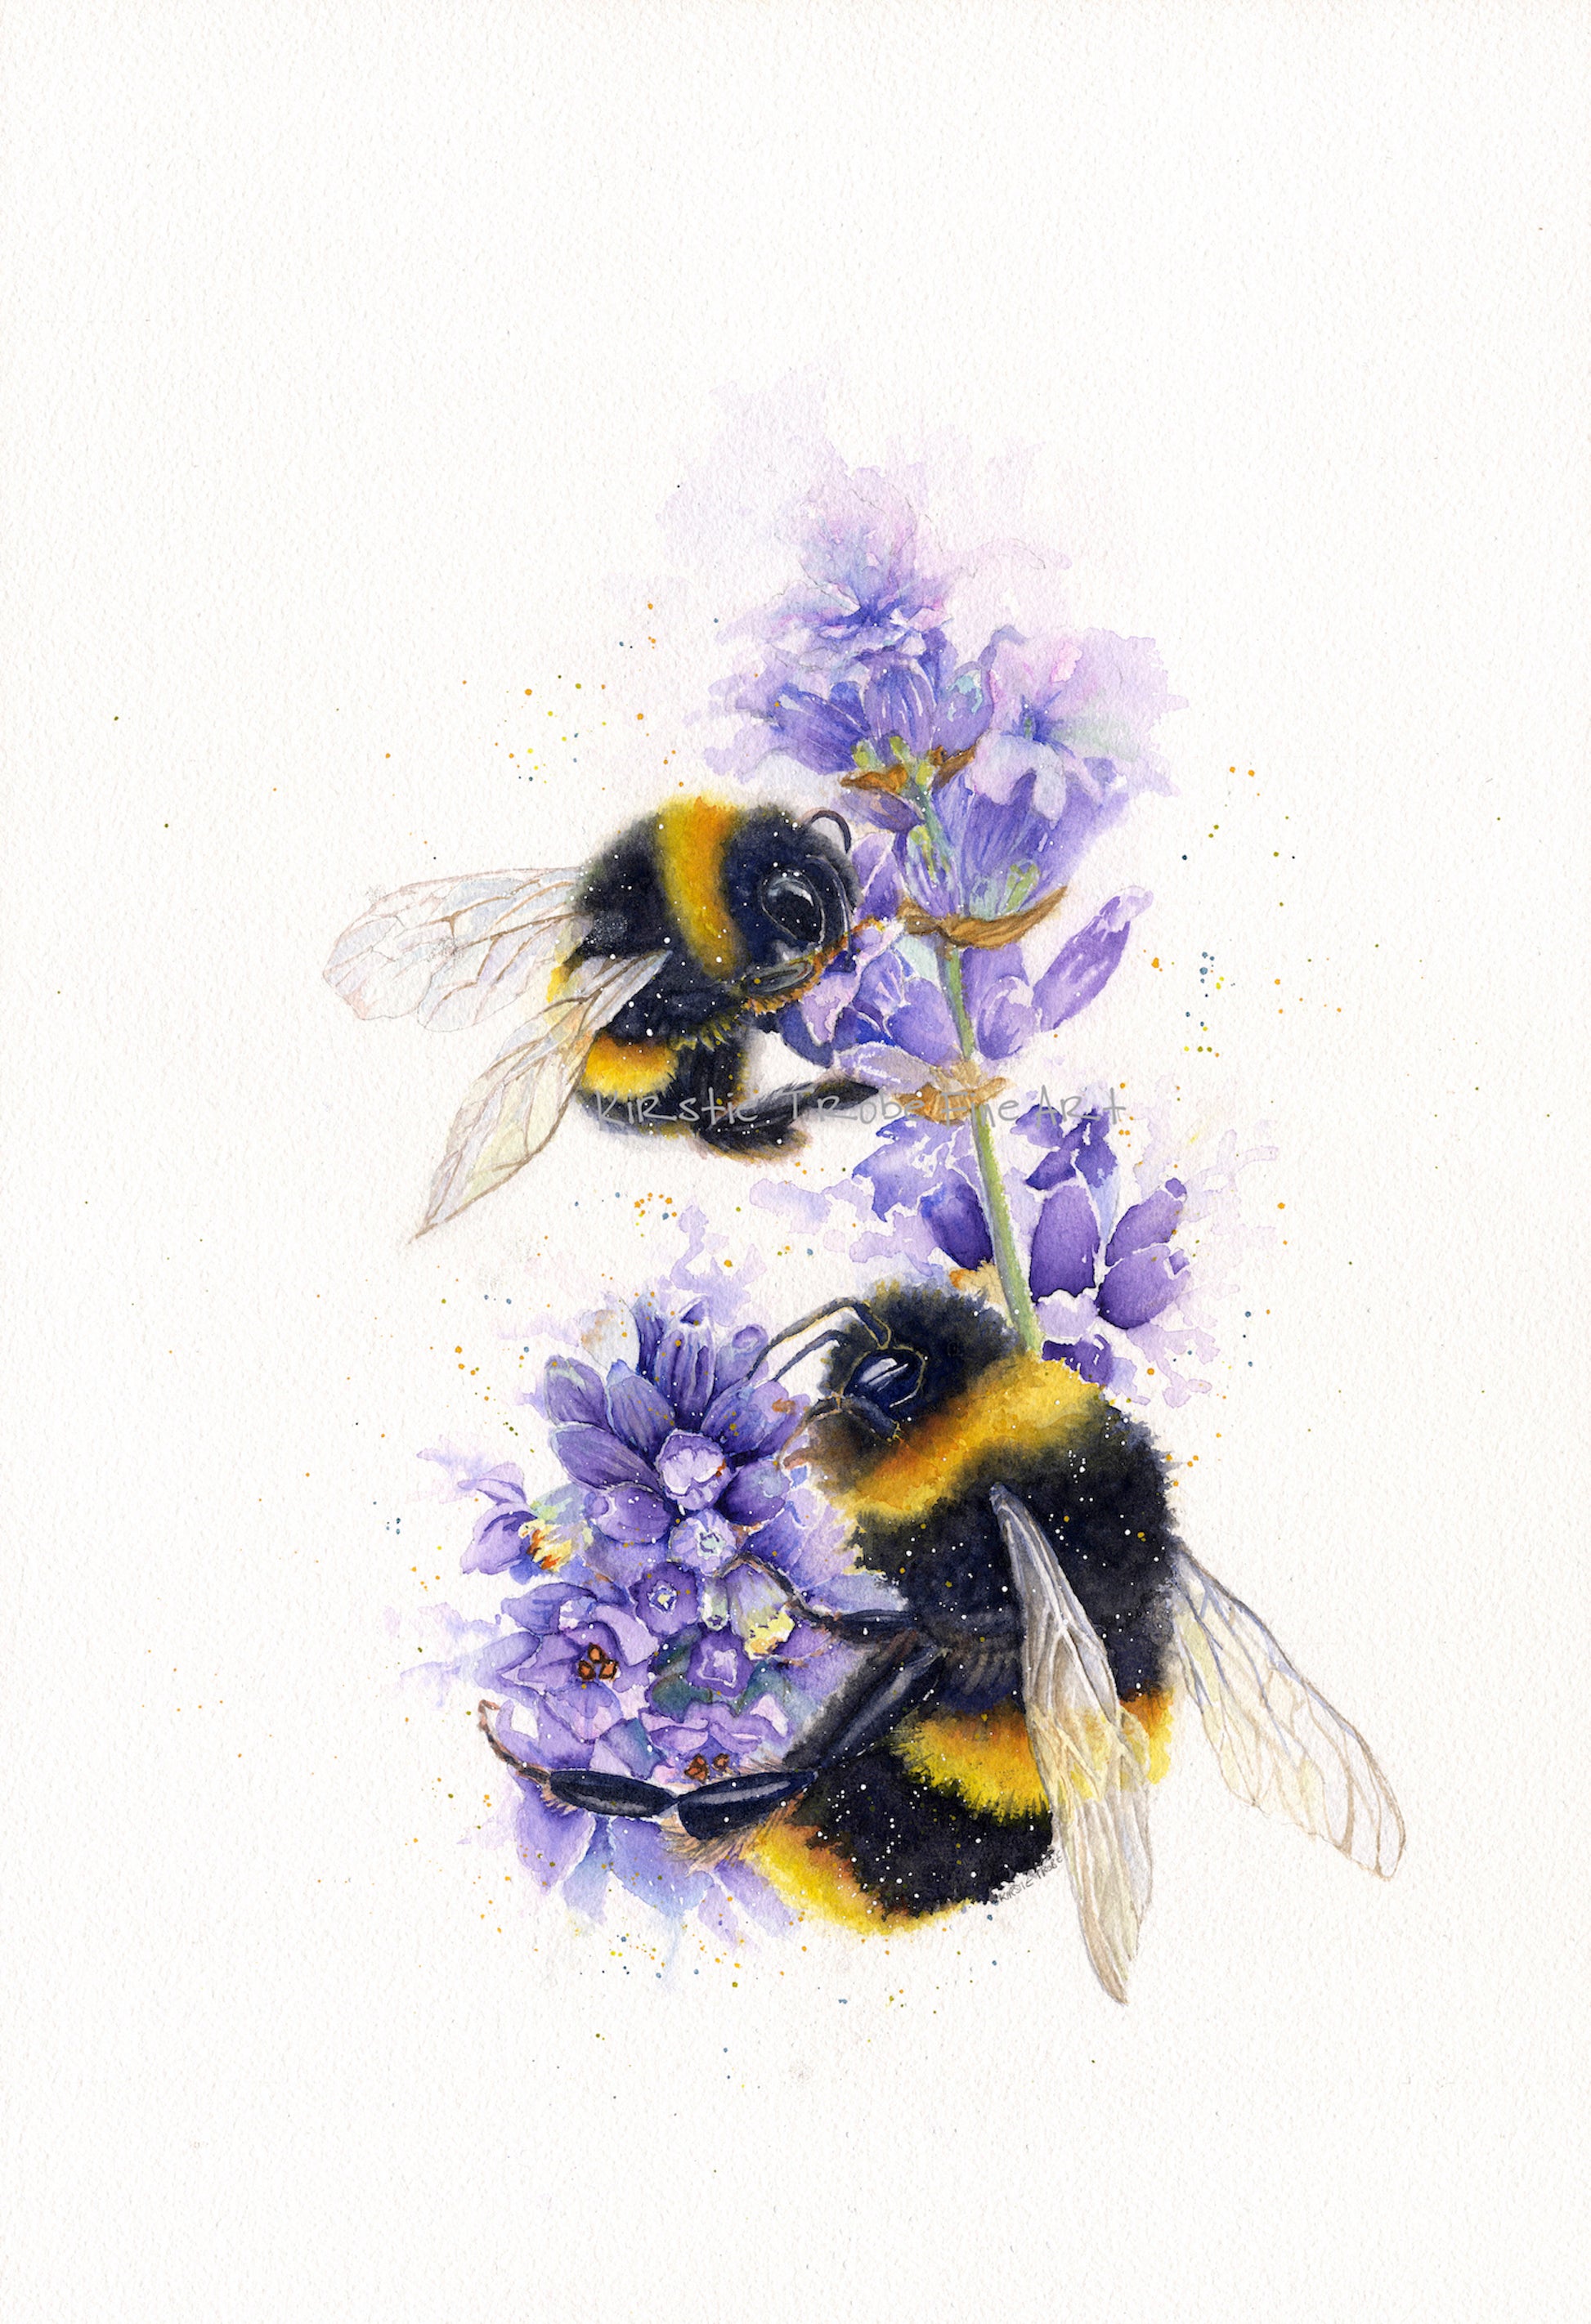 Two fluffy fuzzy bumble bees feed on two lavender flowers. They are depicted in a portrait fashion, the top bee is smaller and further away. The bees form a Ying and Yang shape. Original Painting to fit 20x16 inch frame